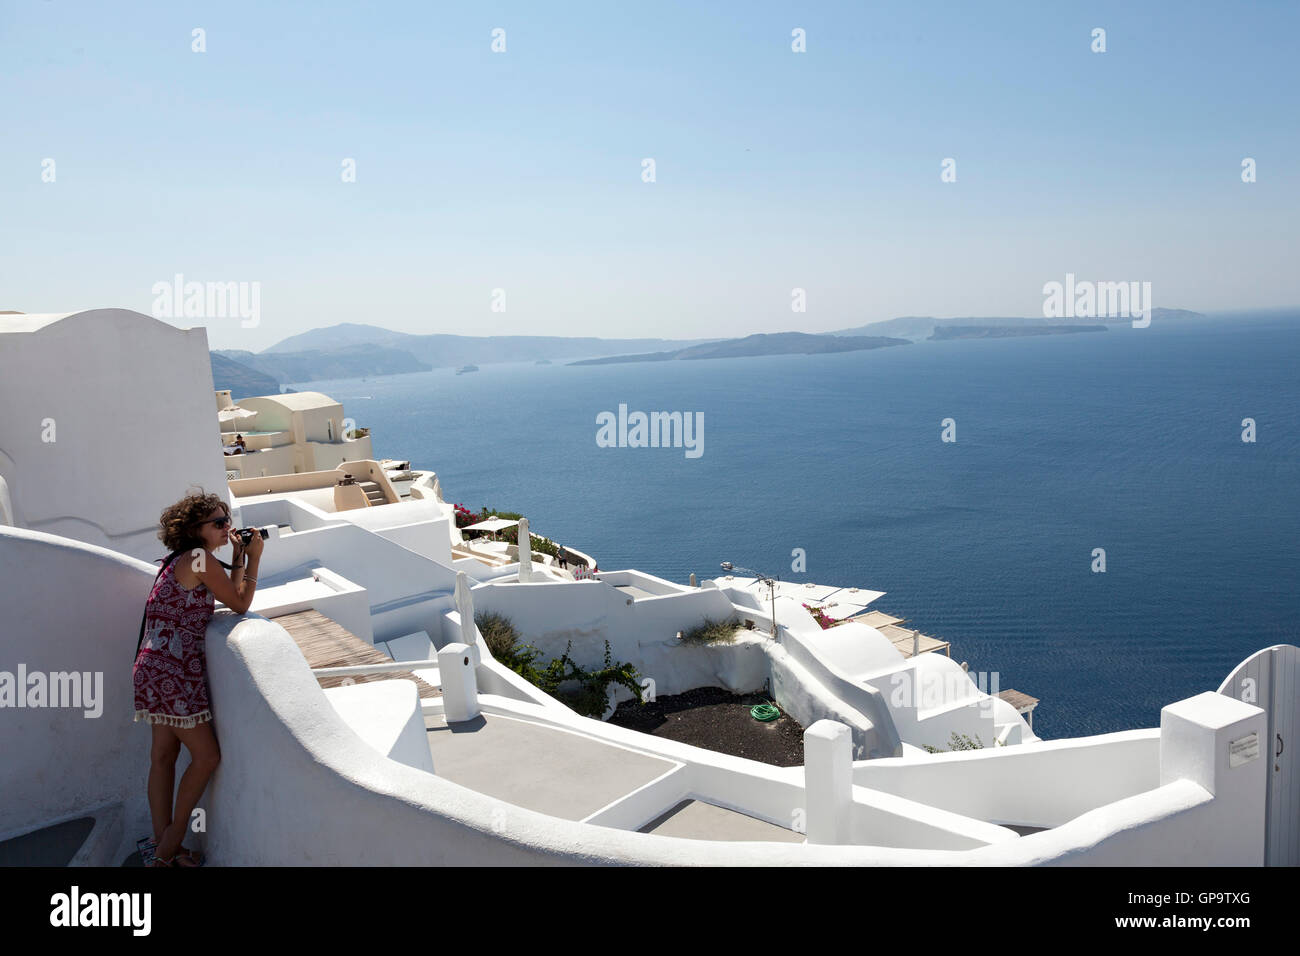 A woman takes a photograph in the town of Oia on the hot and sunny Greek island of Santorini Stock Photo